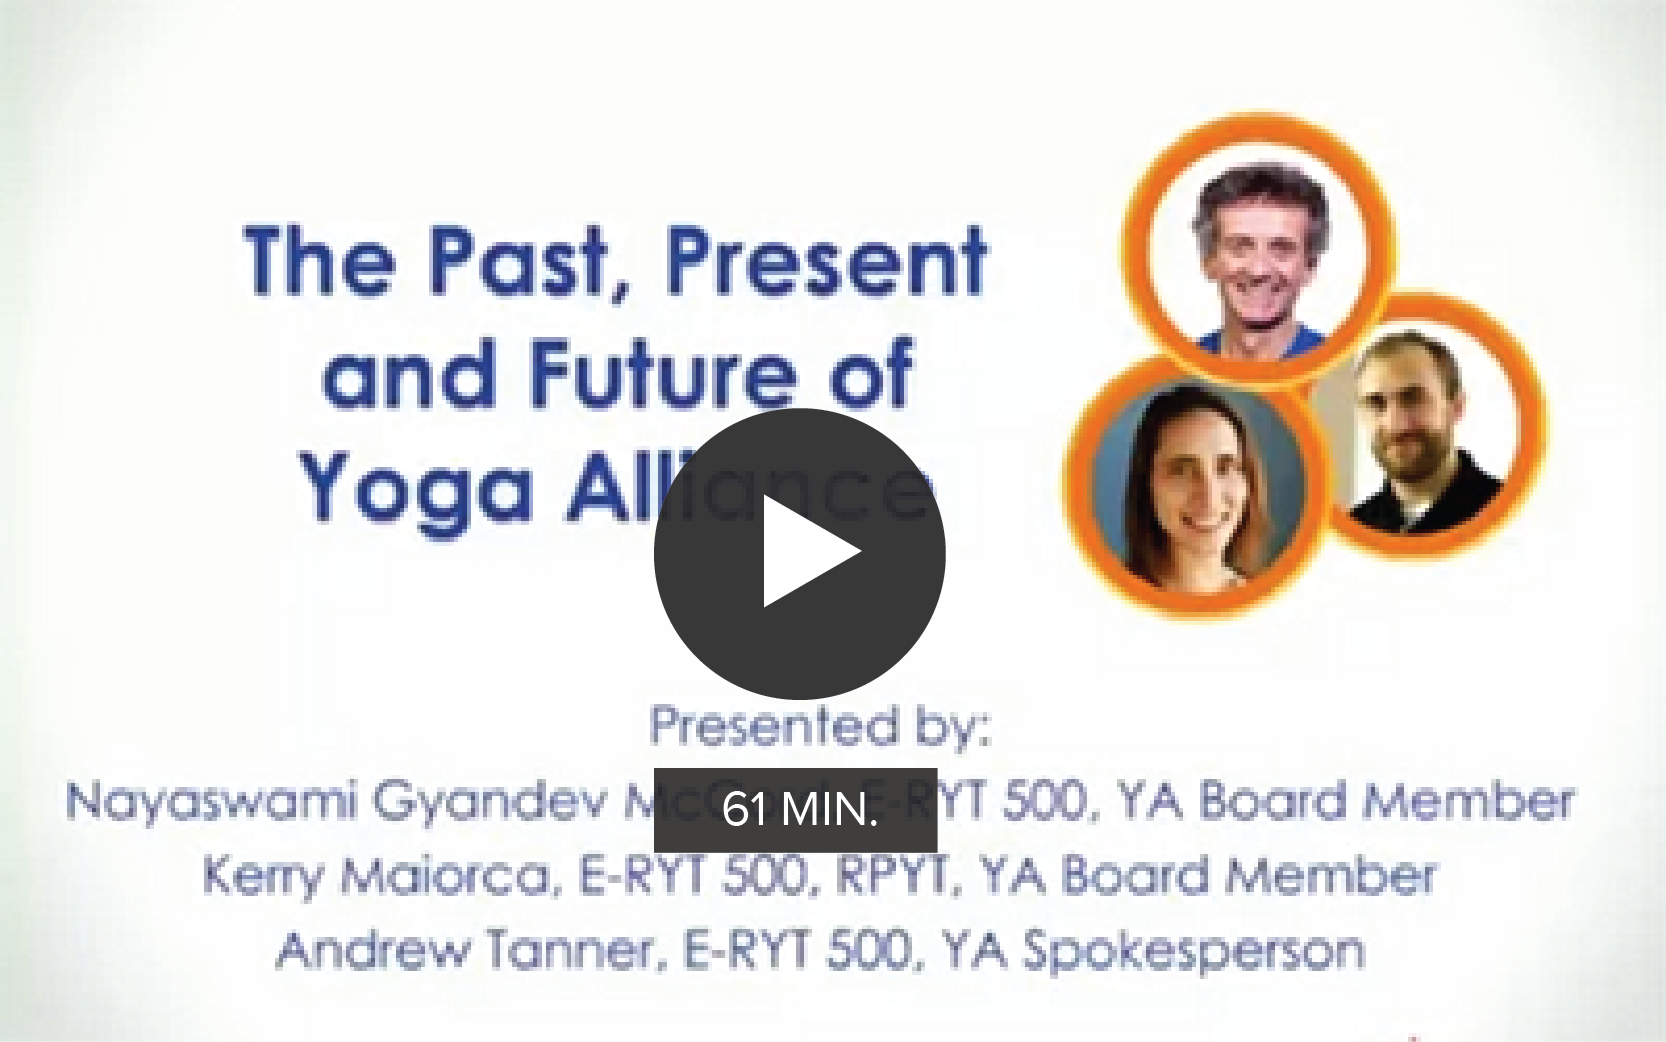 The Past, Present and Future of Yoga Alliance